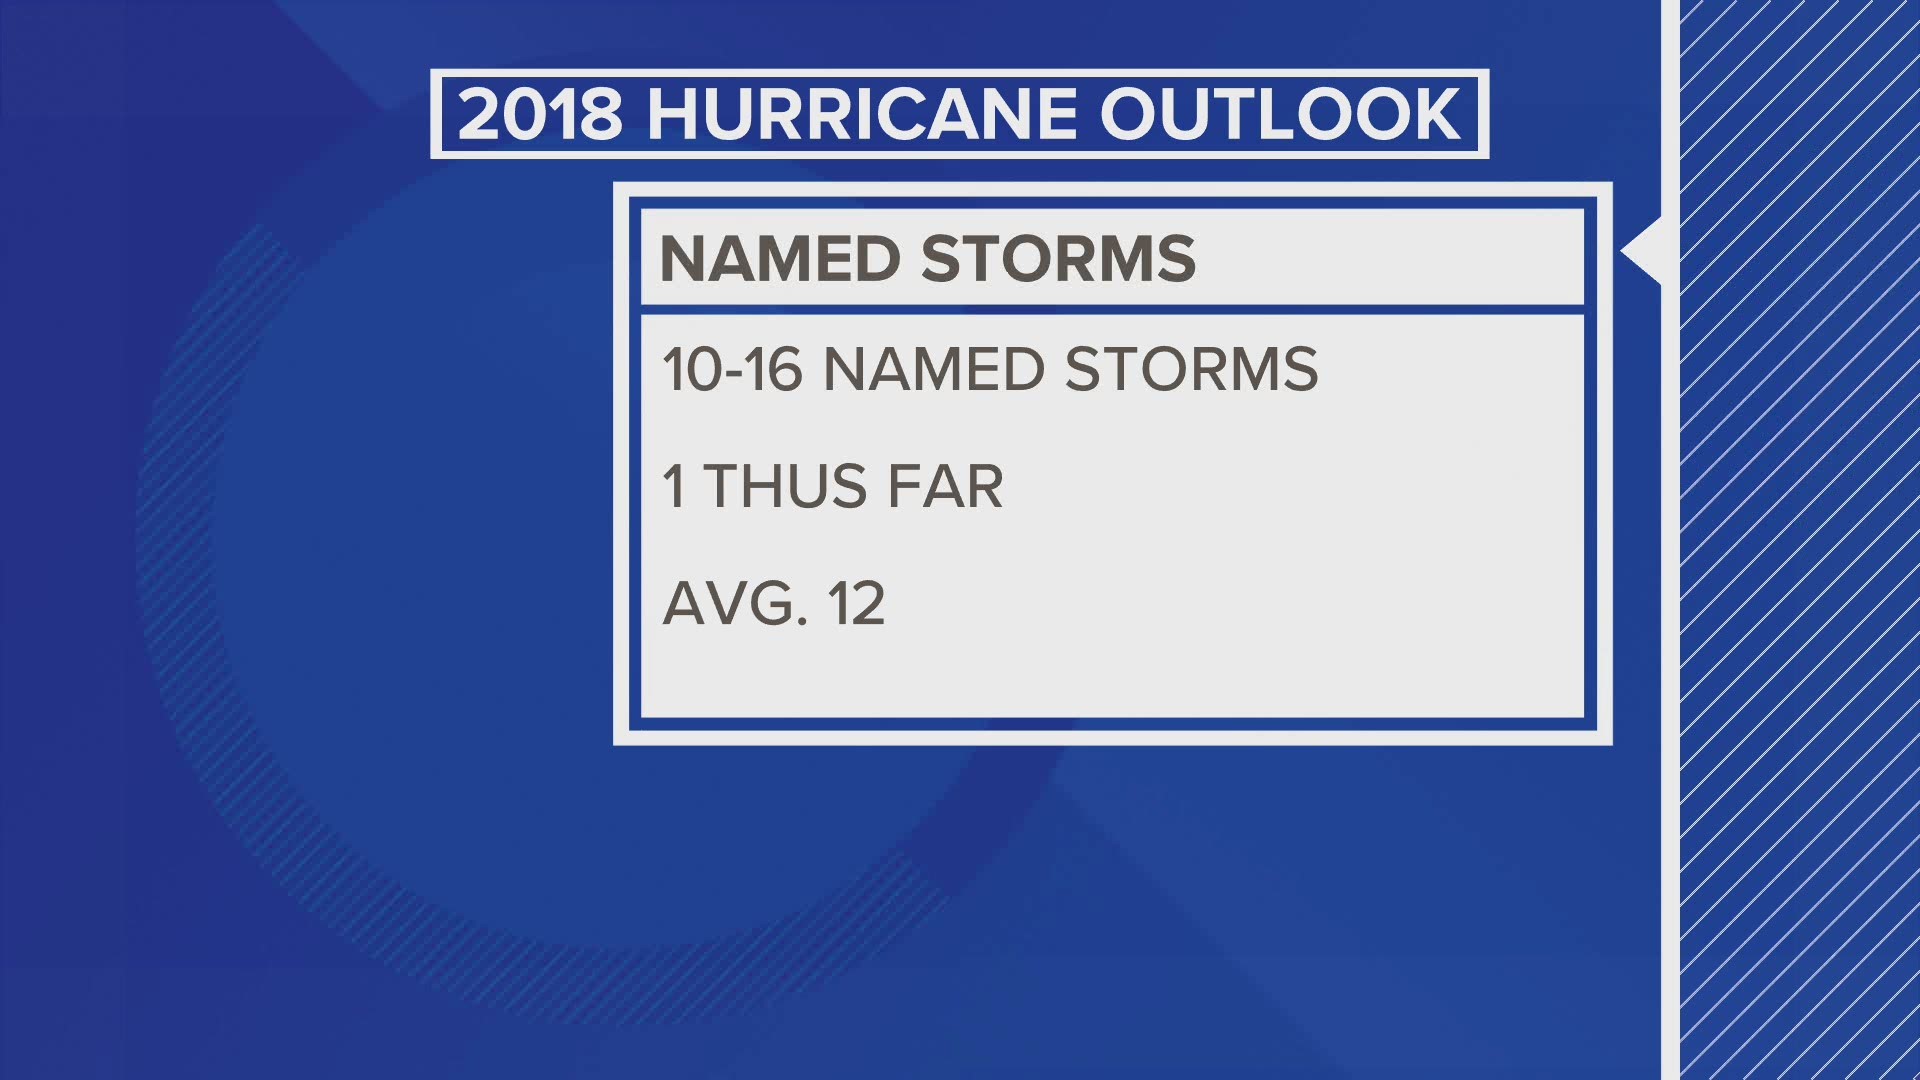 Since June 1st is the official start to Hurricane Season, Meteorologist Michael Behrens is breaking down the forecast for this year's season.